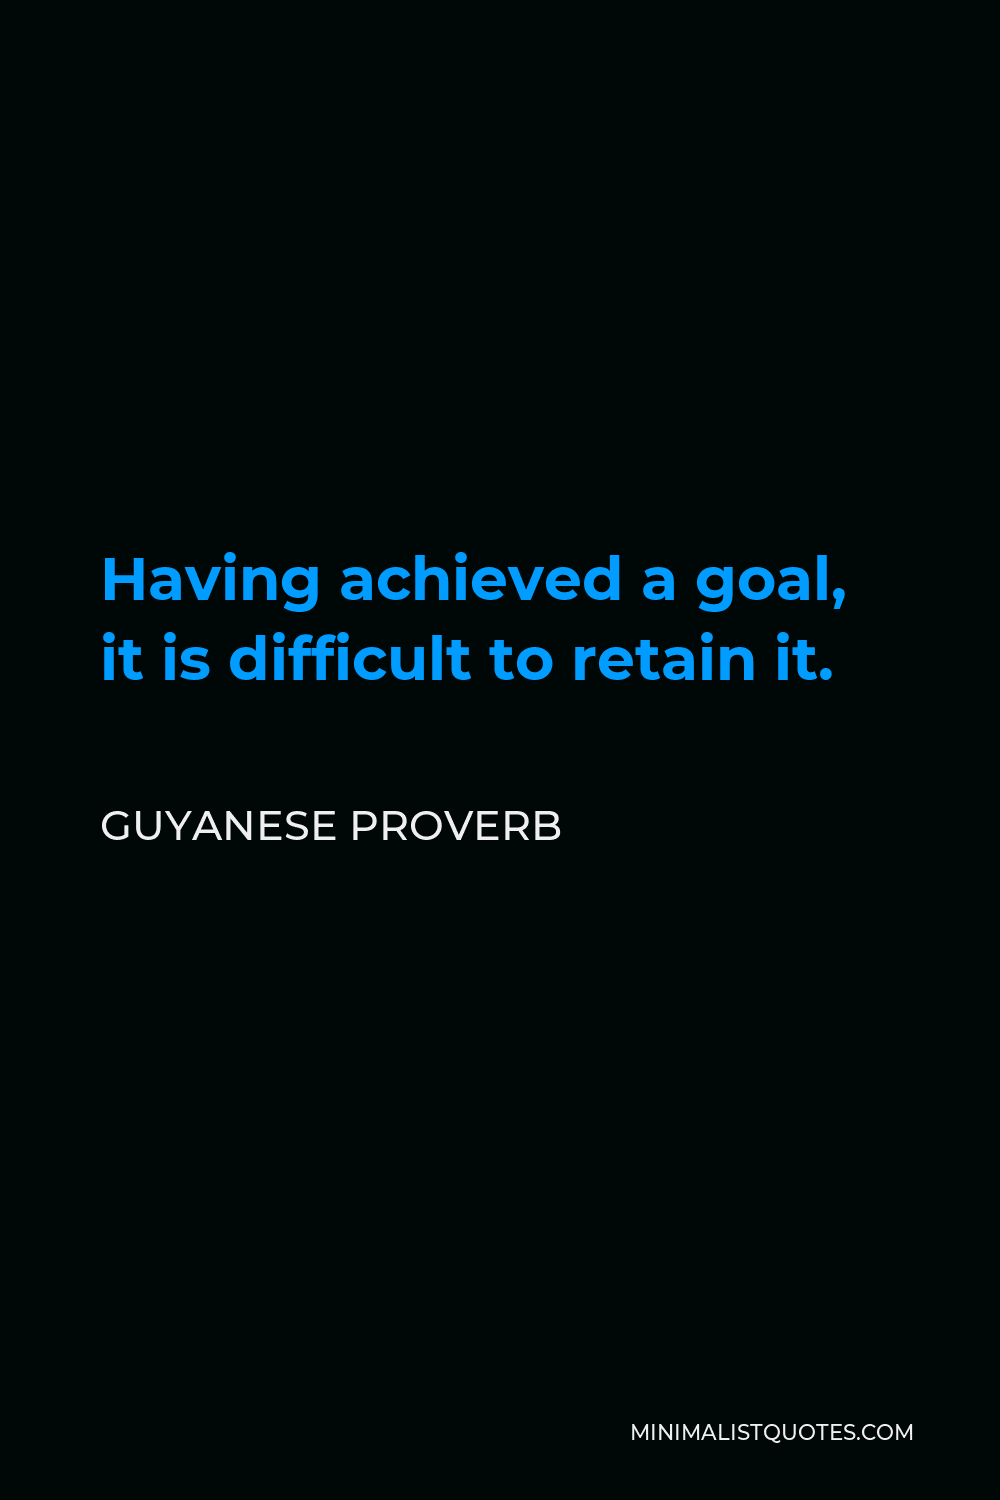 Guyanese Proverb Quote - Having achieved a goal, it is difficult to retain it.